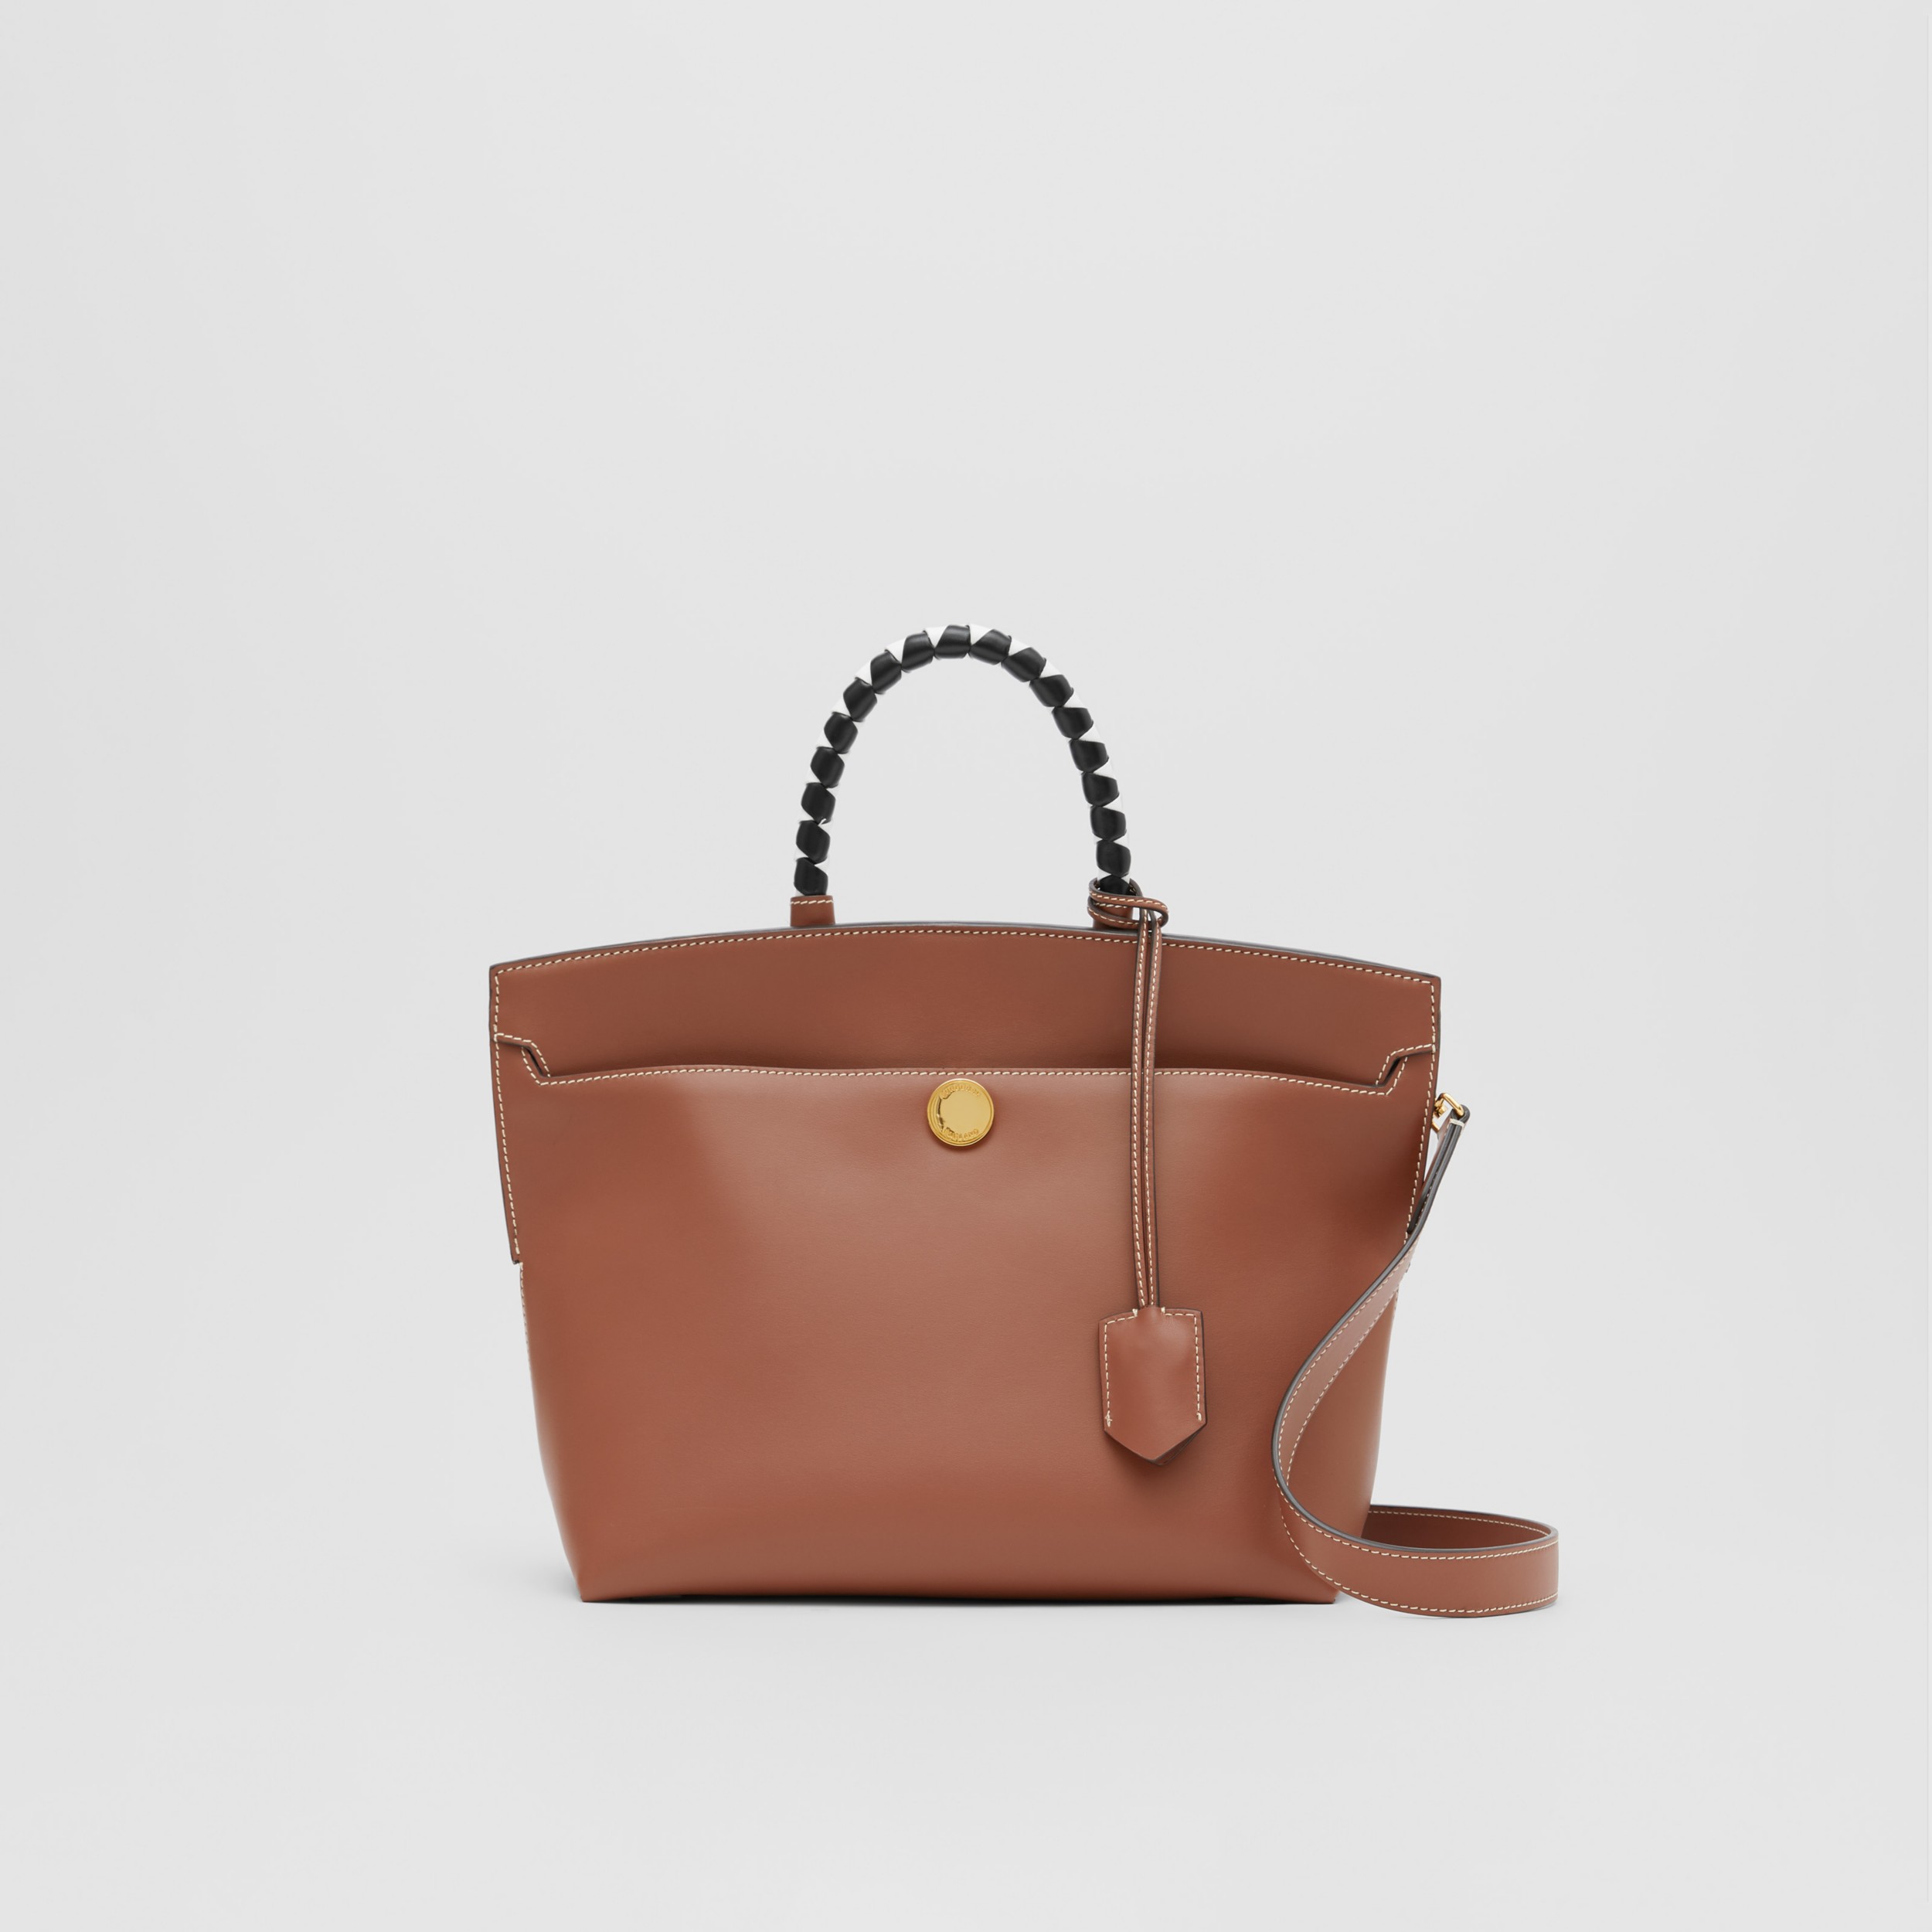 Small Leather Society Top Handle Bag in Tan - Women | Burberry Canada